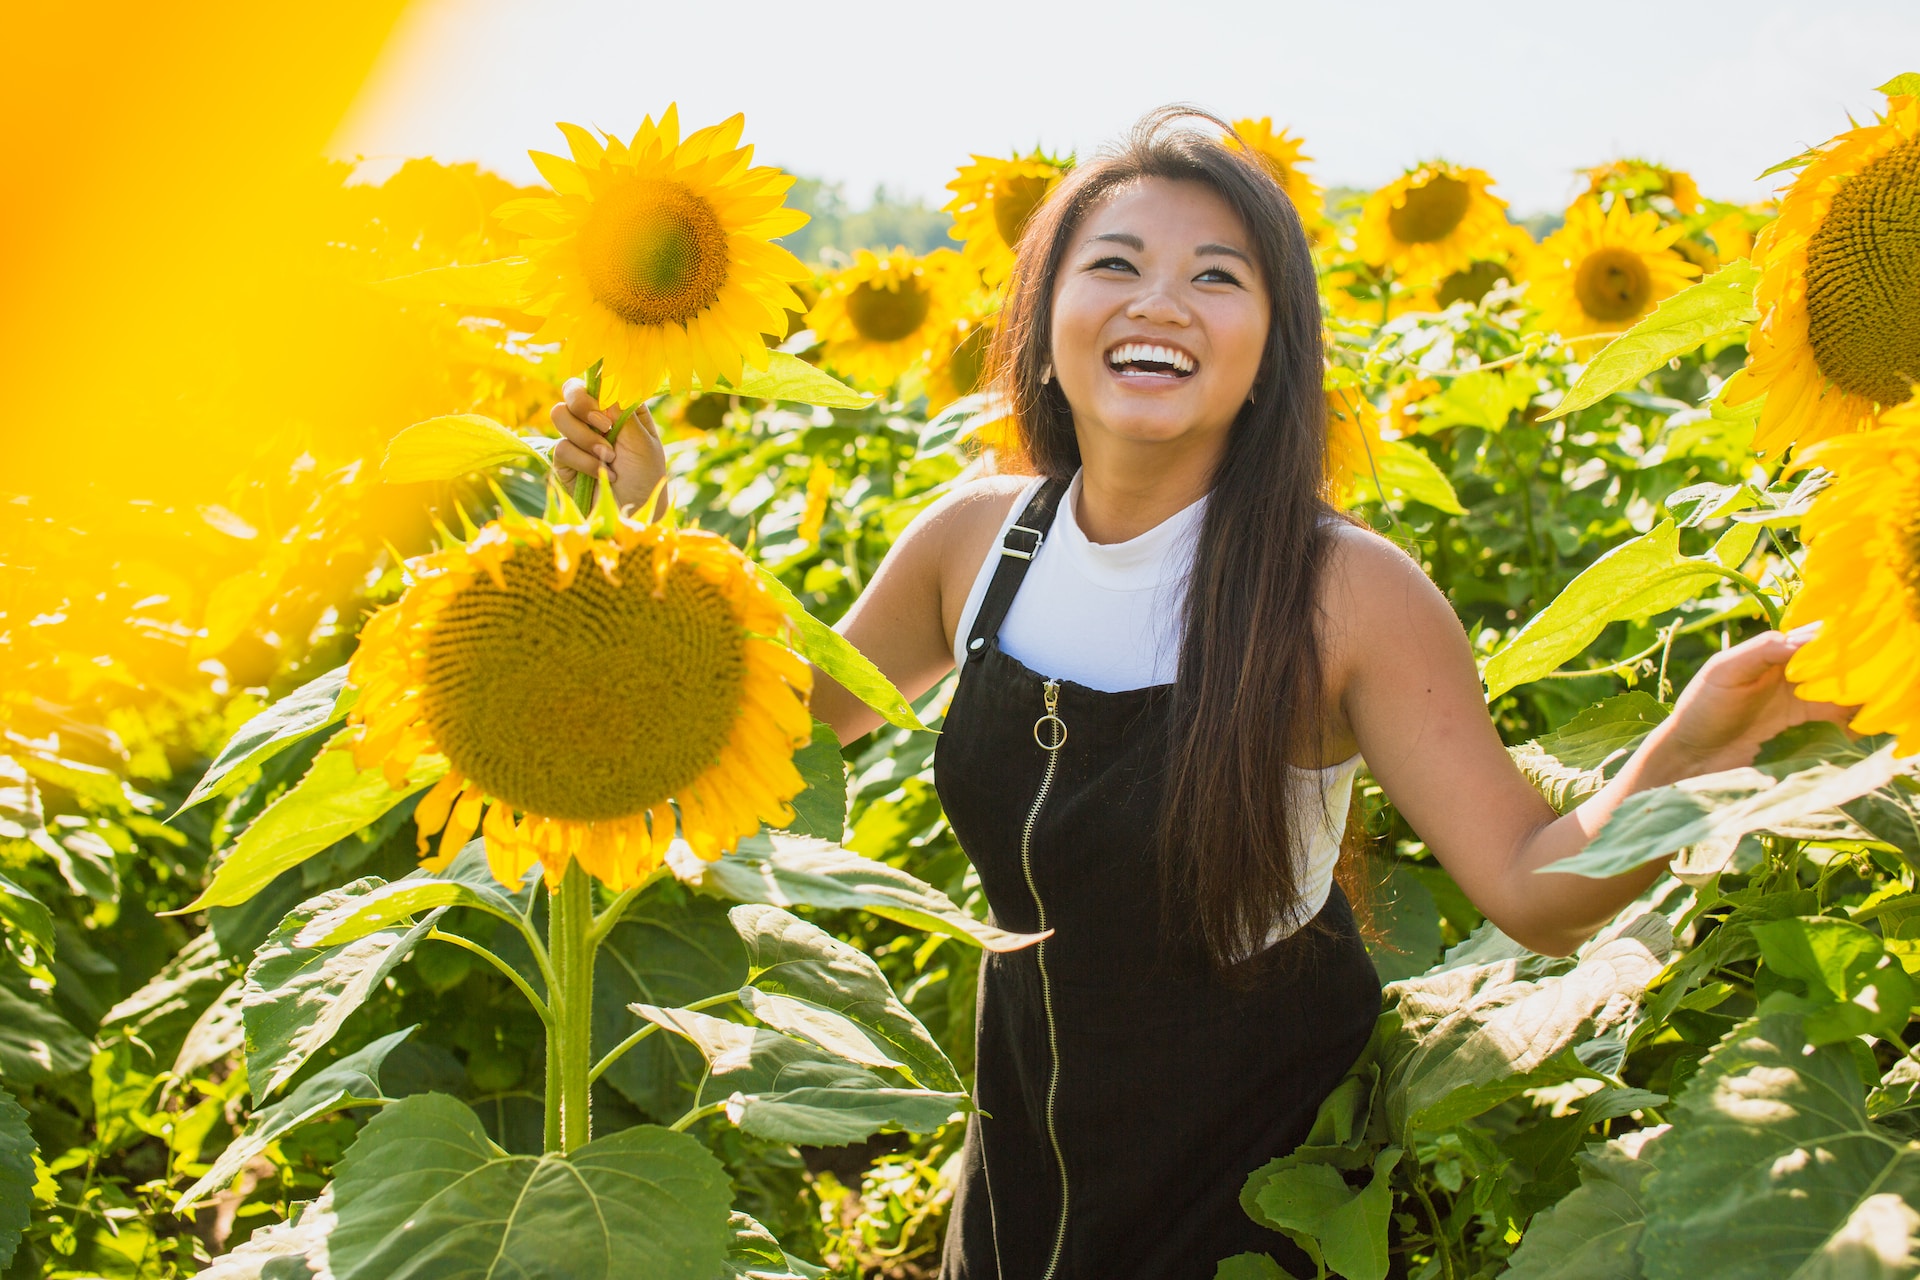 Ottawa woman enjoying the sunflower field with a bright smile